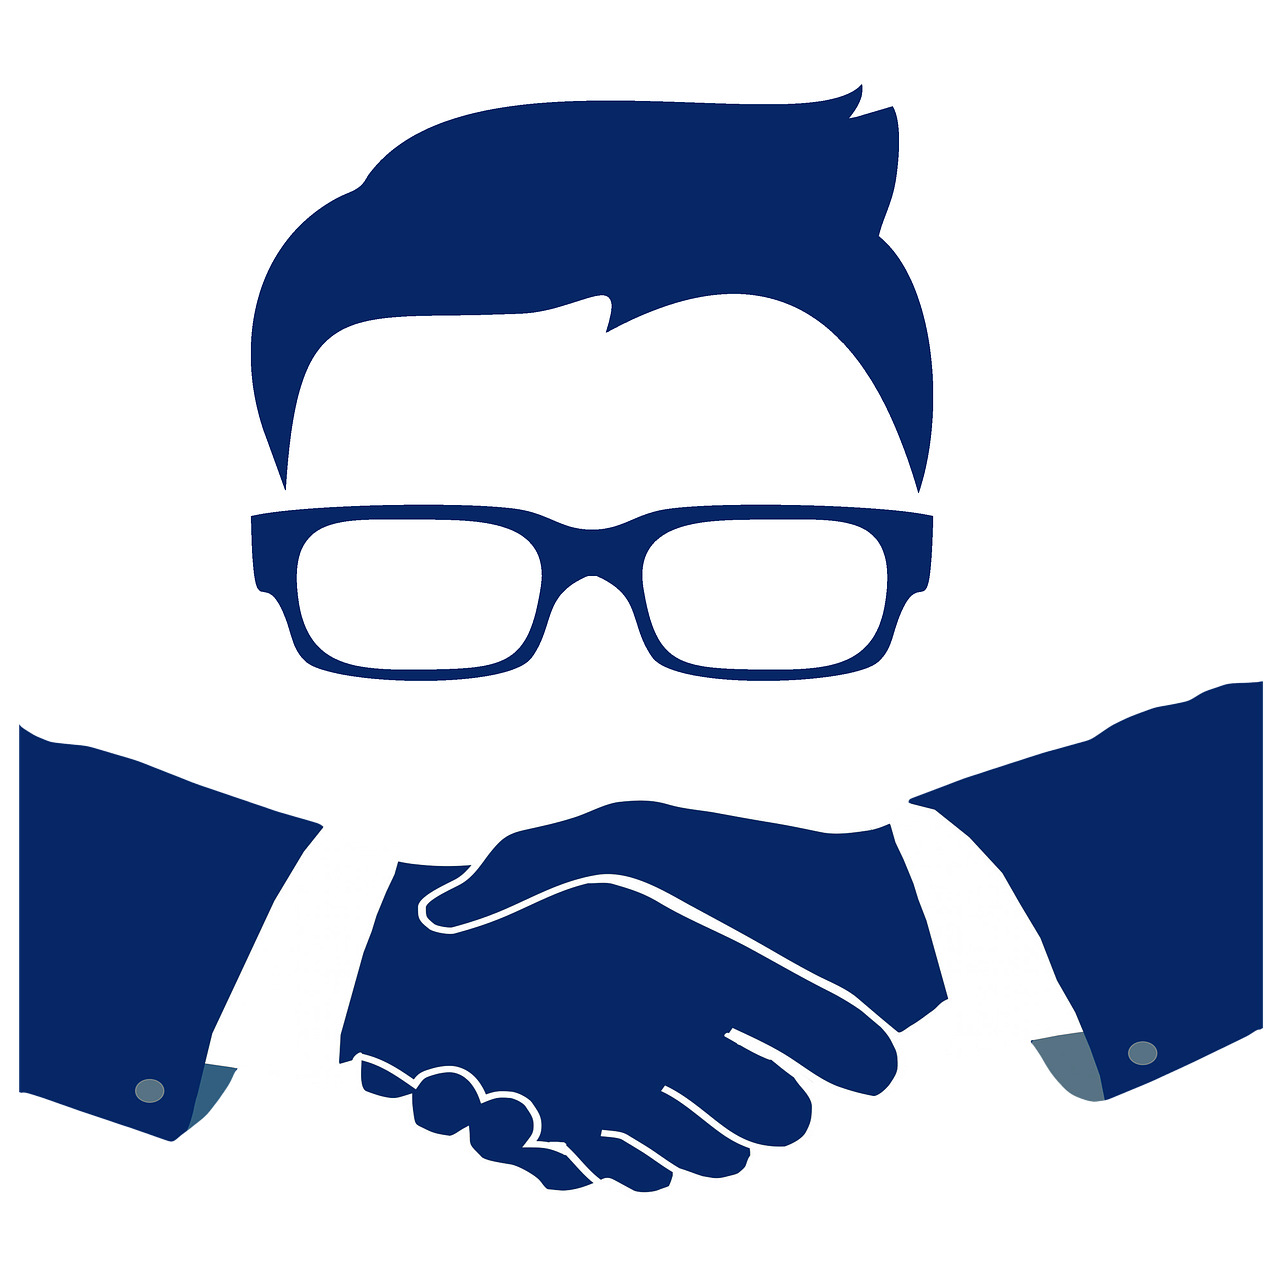 The Opticians Association of America (OAA), and the National Federation of Opticianry Schools (NFOS), have announced a merger. Image by Gerd Altmann from Pixabay